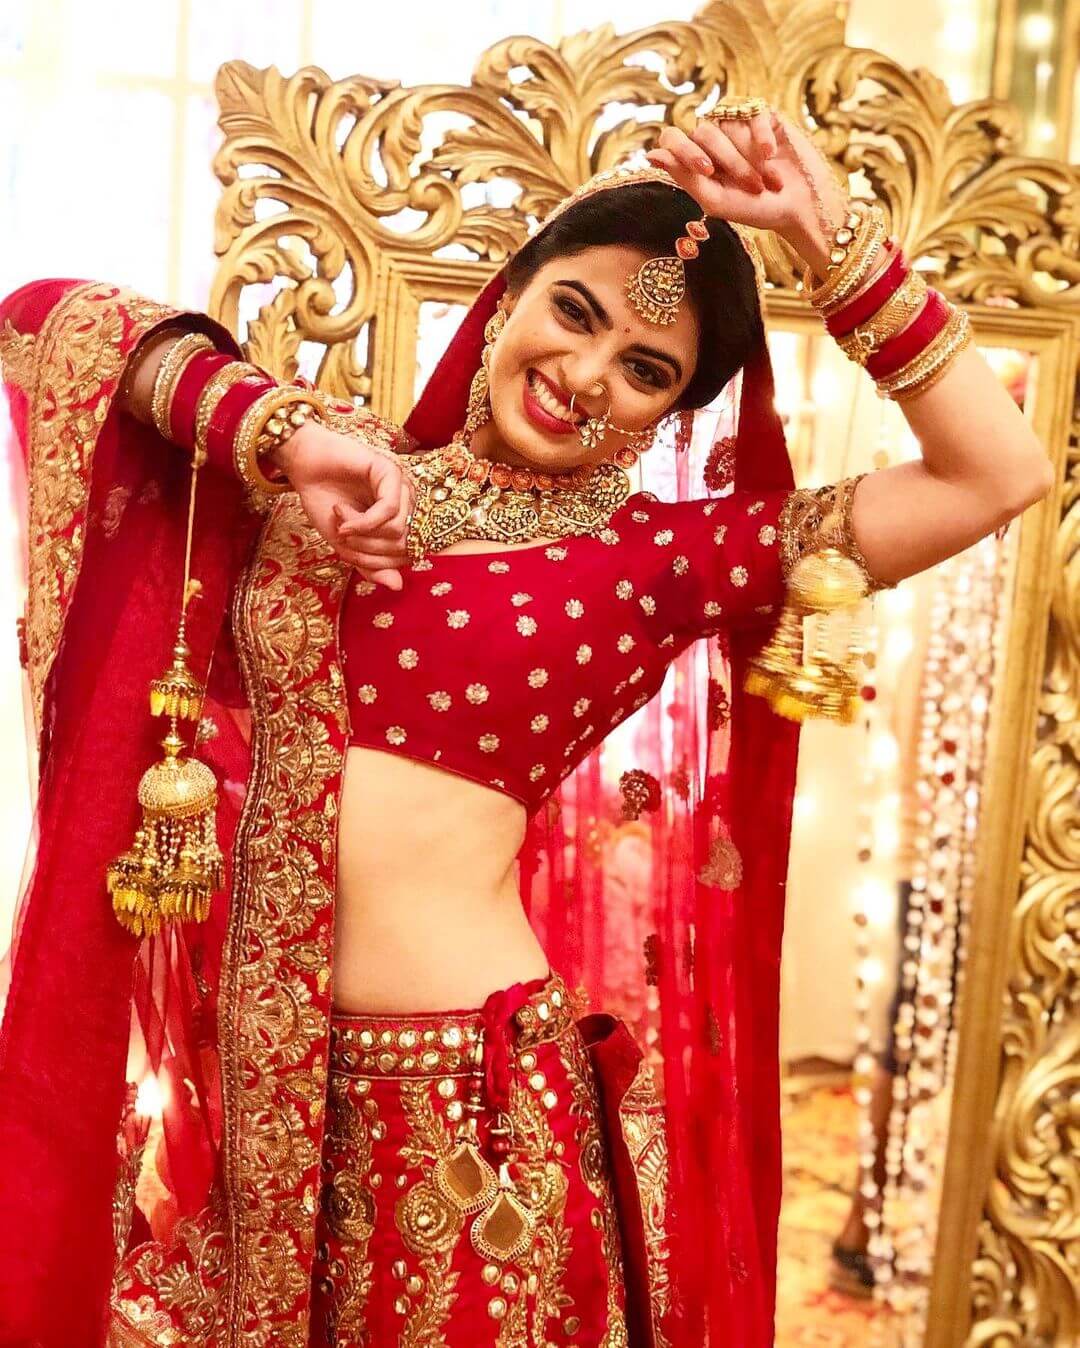 Roshni Sahota Look Beautiful In Bridal Outfit With Gold Jewellery